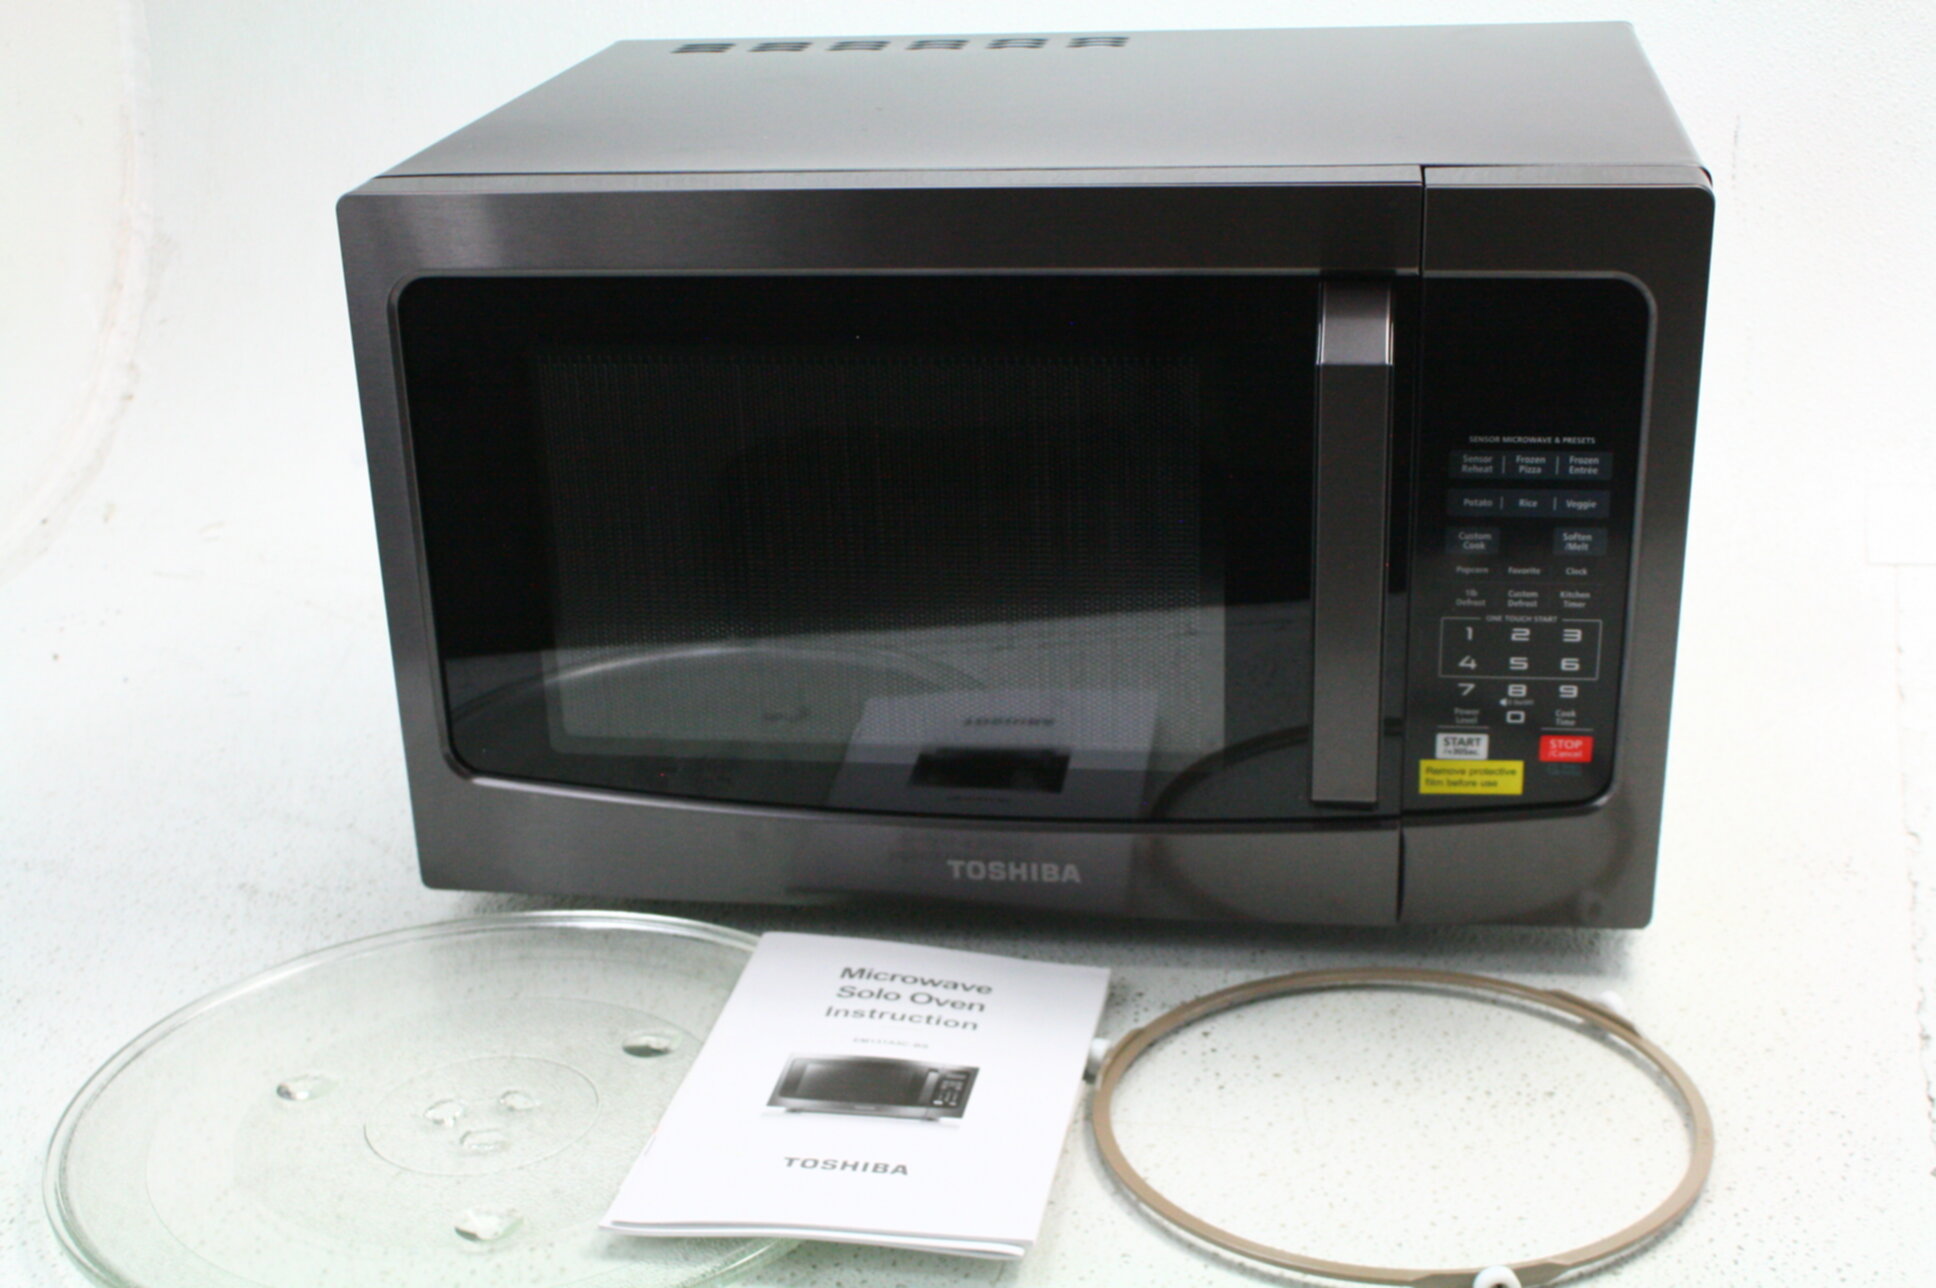 https://storables.com/wp-content/uploads/2023/08/12-best-toshiba-em131a5c-bs-microwave-oven-for-2023-1692152023.jpeg